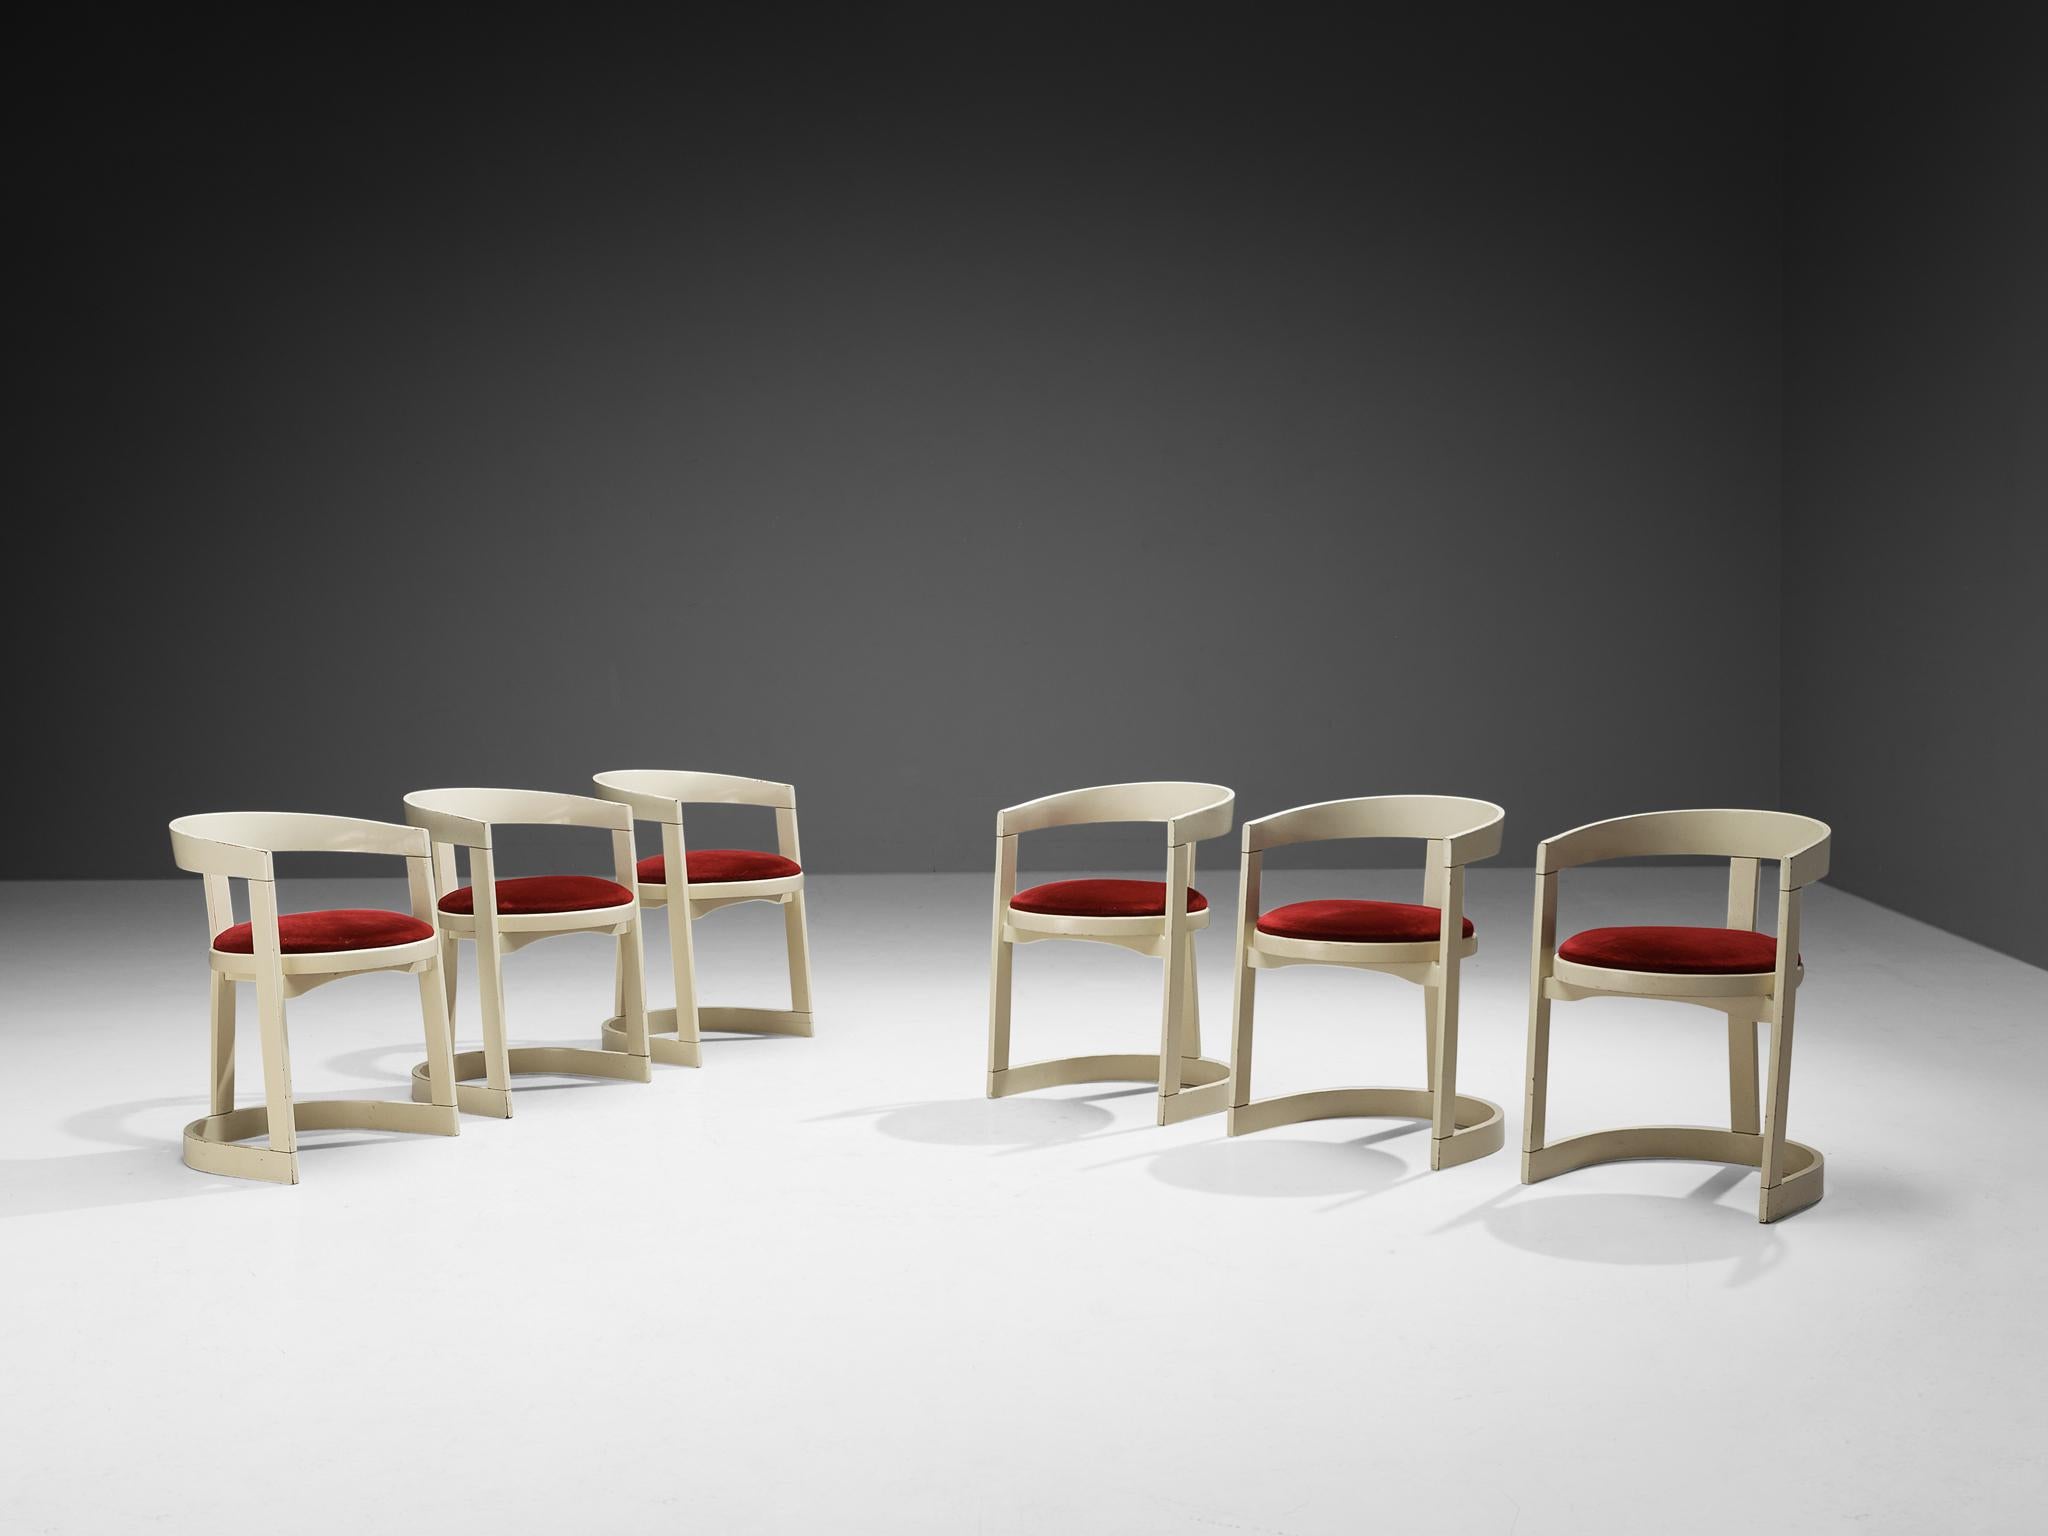 Set of six dining chairs, velvet, lacquered wood, Italy, 1970s

These armchairs embrace the aesthetic sense of the 'Pamplona' chairs designed by Augusto Savini for Pozzi. This design is based on solely round shapes. The curved shape of the back is